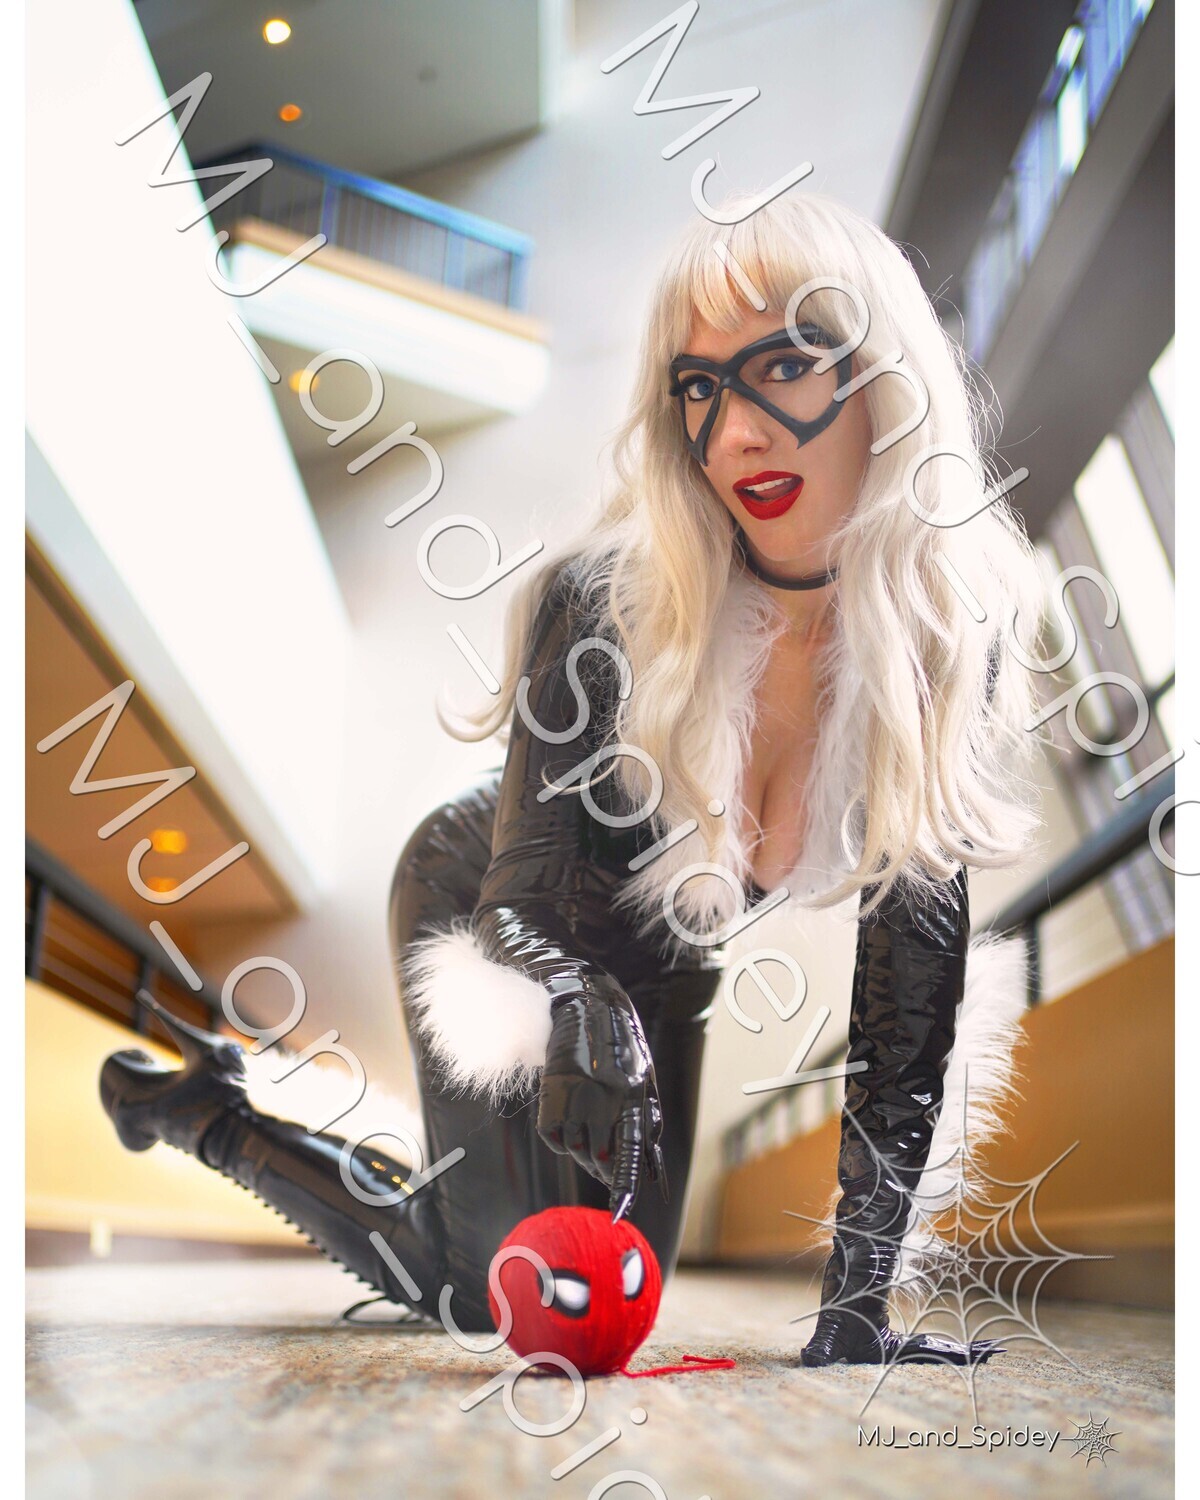 Marvel - Spider-Man - Black Cat - Latex 5 - Digital Cosplay Image (@MJ_and_Spidey, MJ and Spidey, Comics)